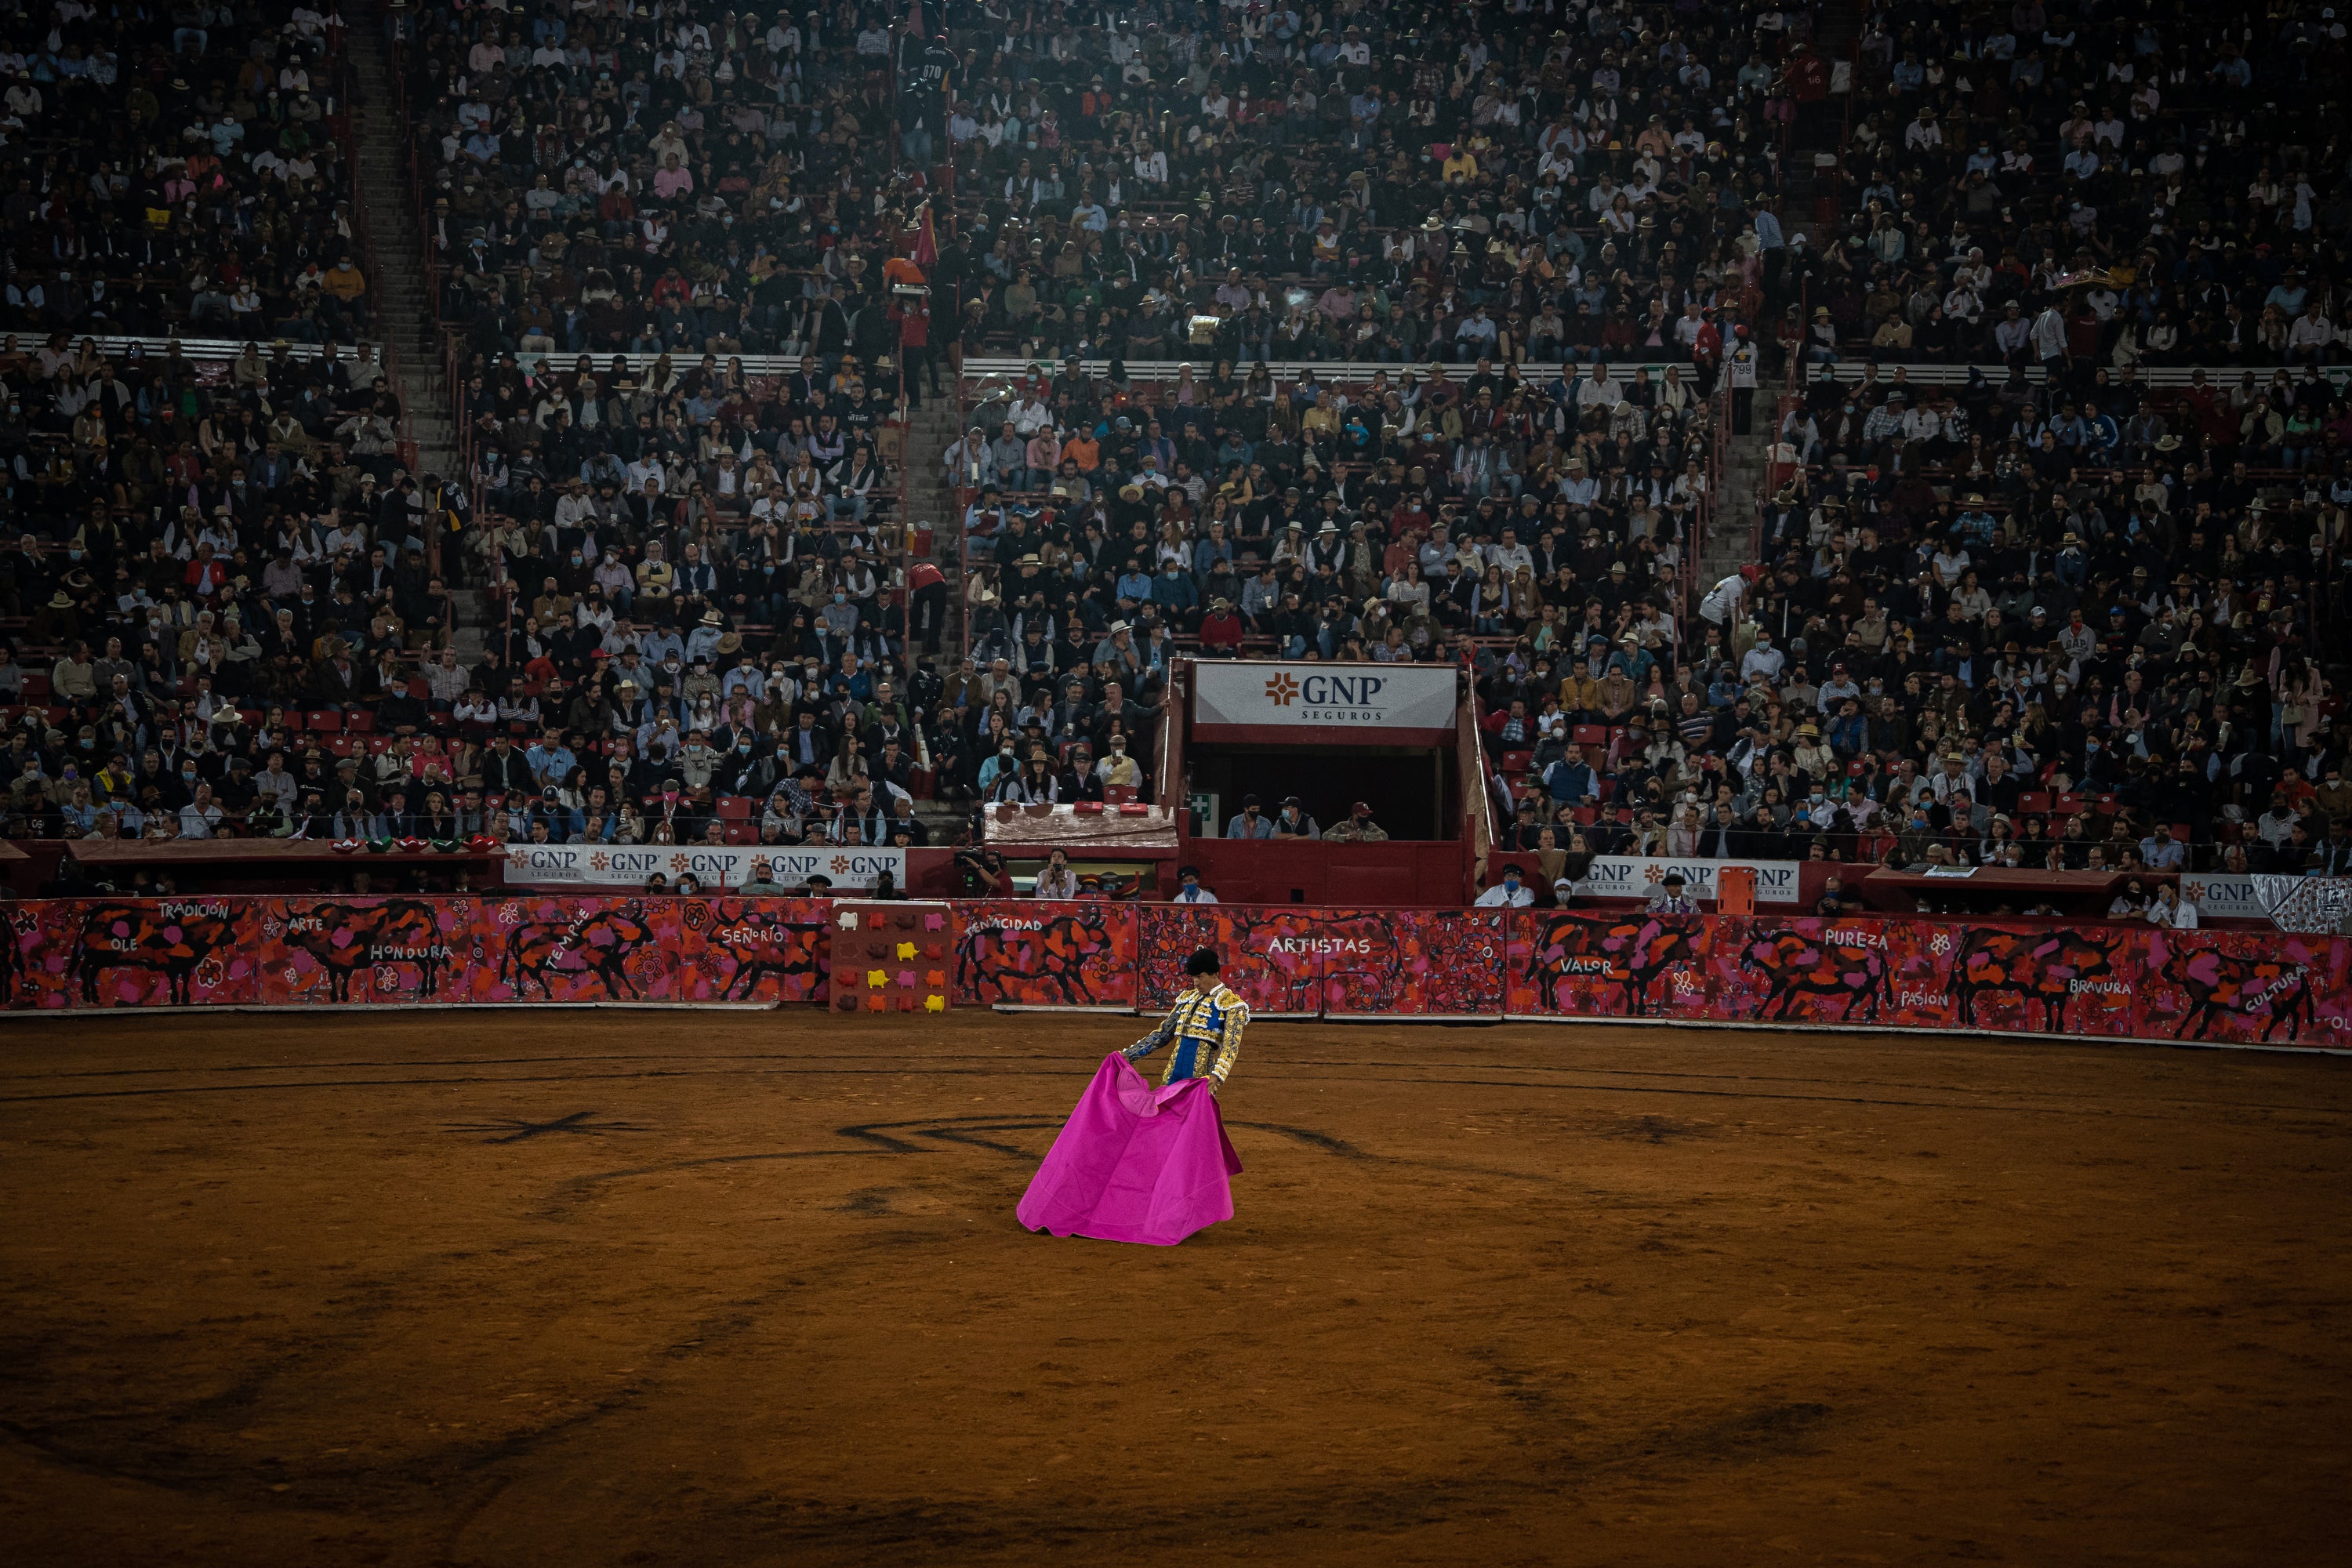 A bullfighter tries to provoke a bull into charging him at the Plaza Mexico in Mexico City